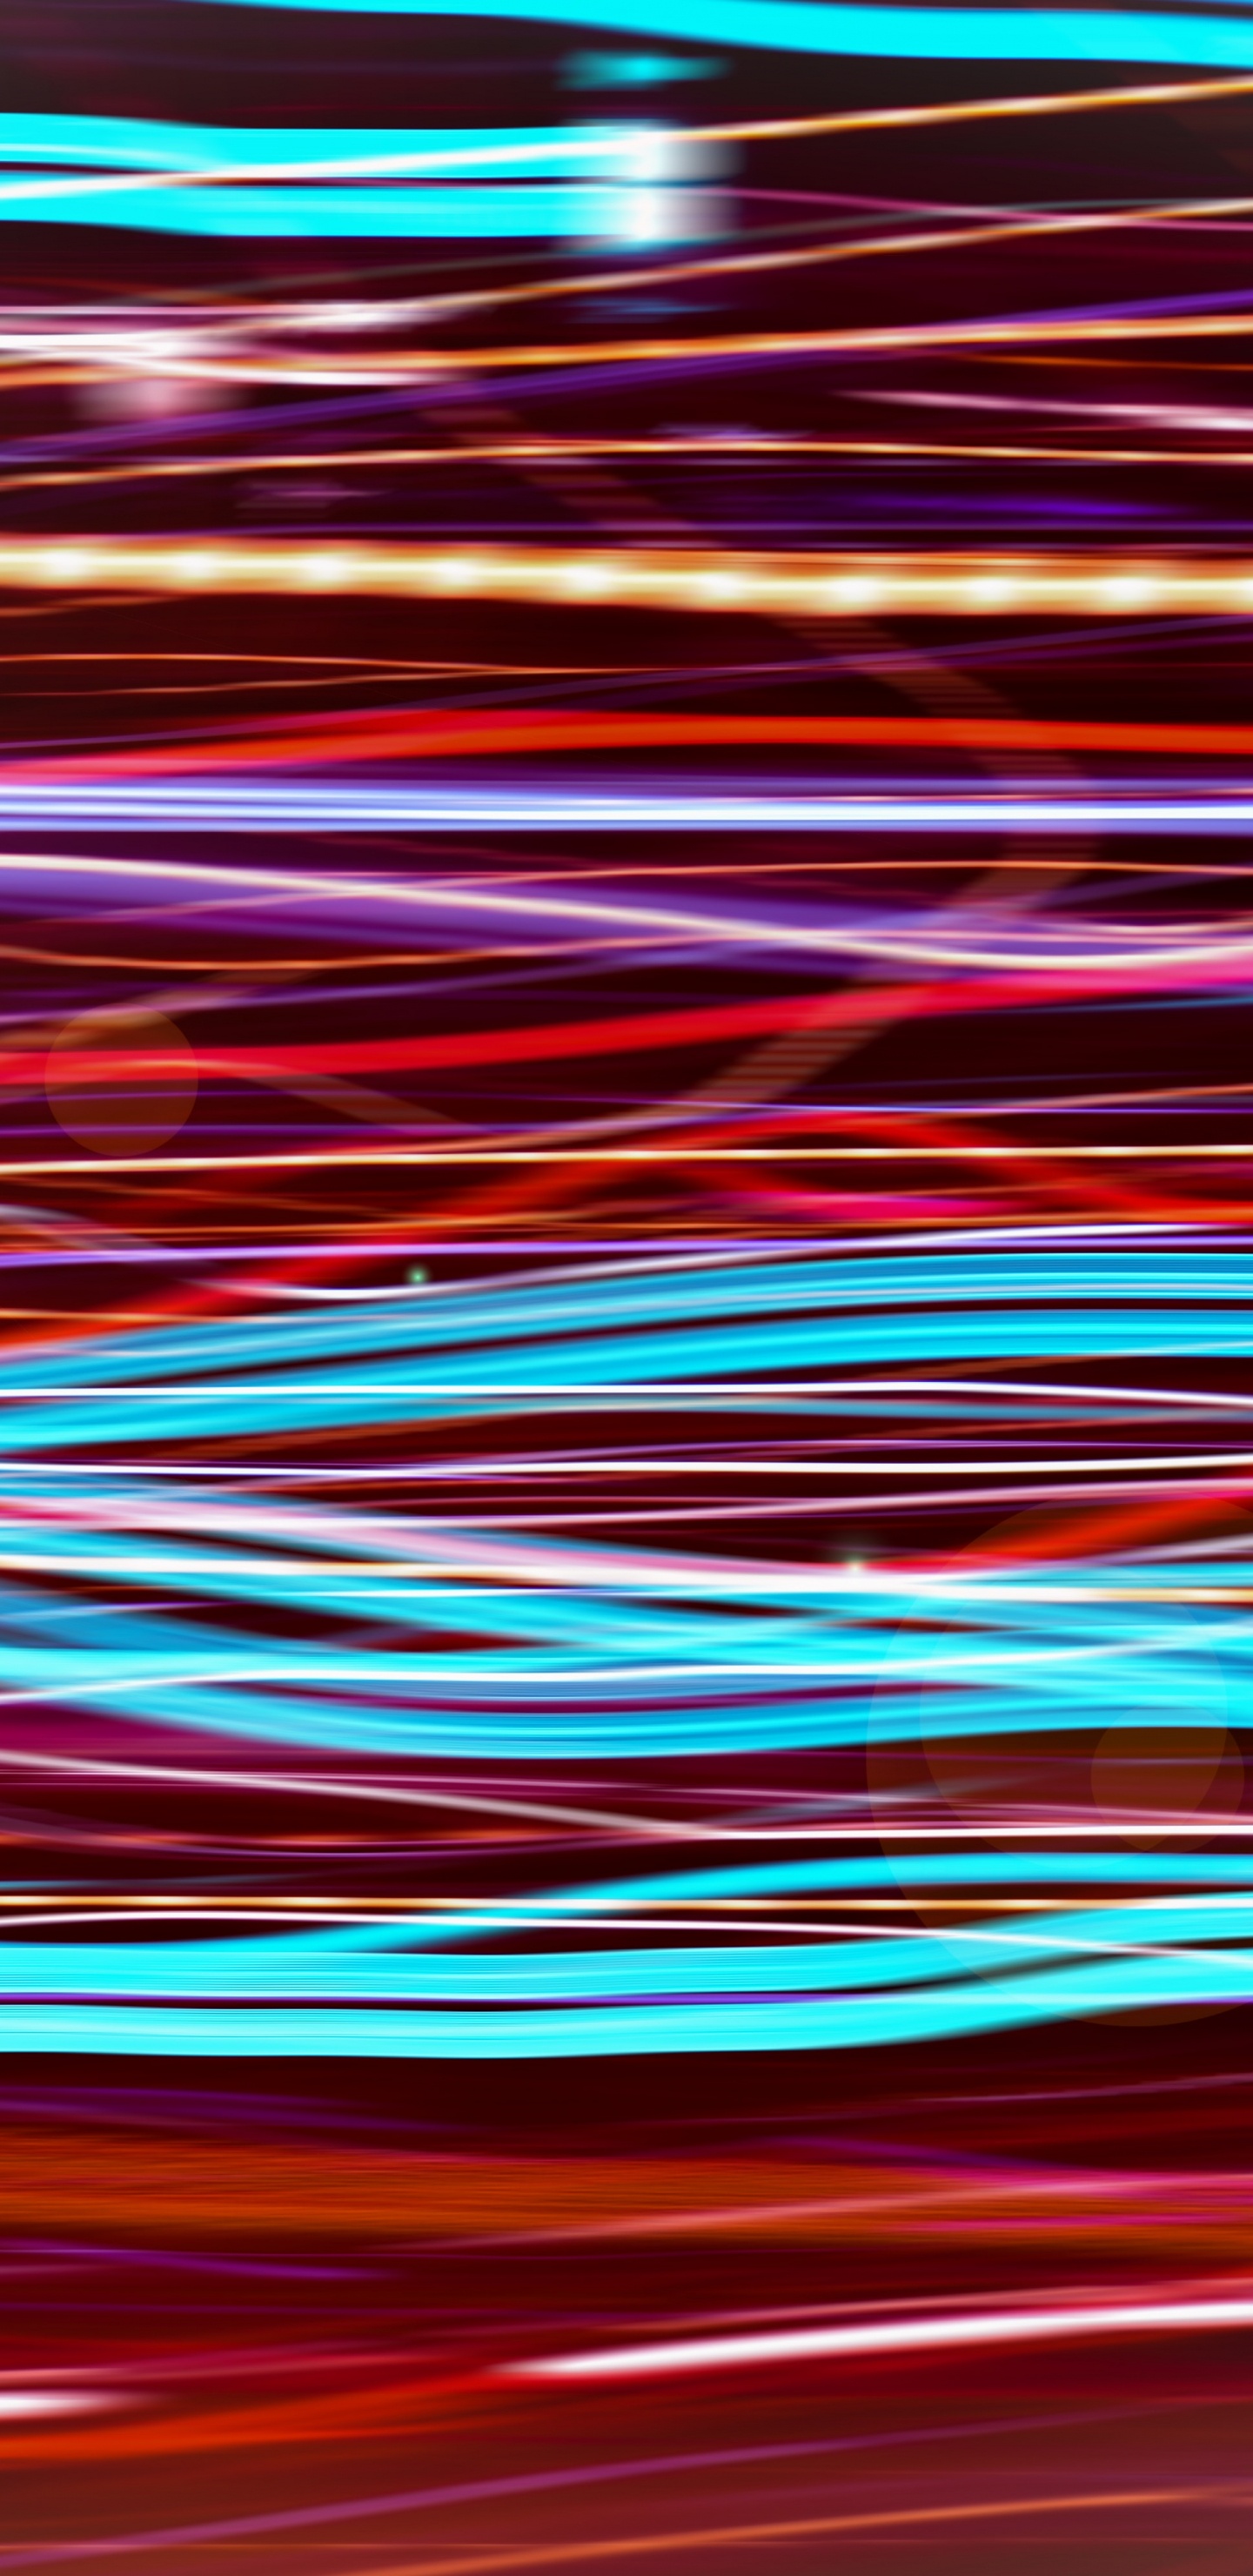 Red White and Blue Light. Wallpaper in 1440x2960 Resolution